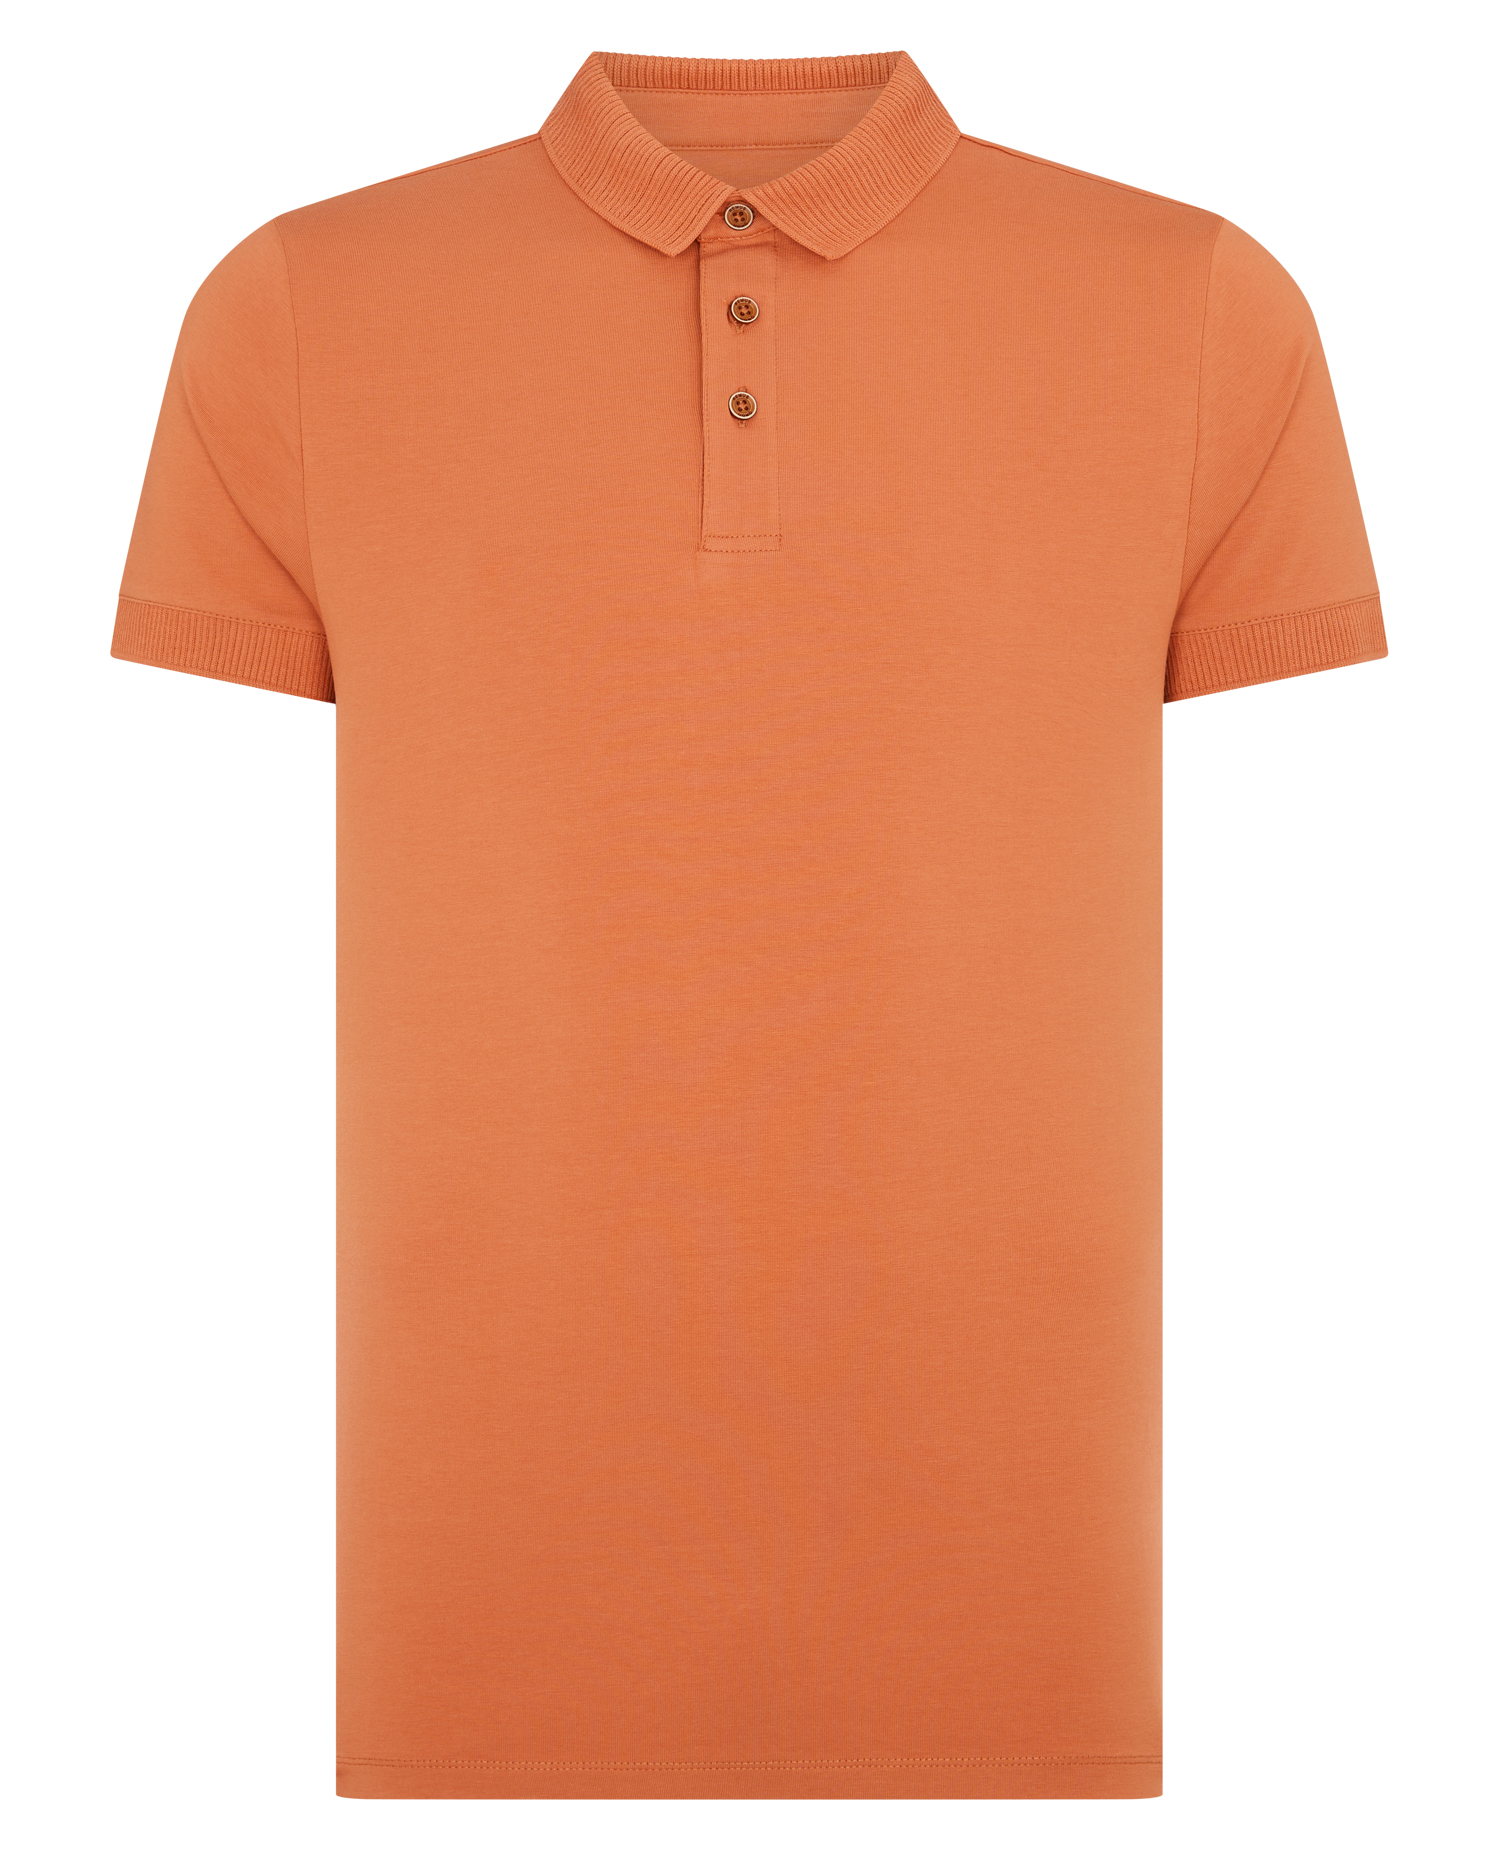 REMUS BRICK POLO | Morans Menswear and Clothing, Thurles, Co. Tipperary